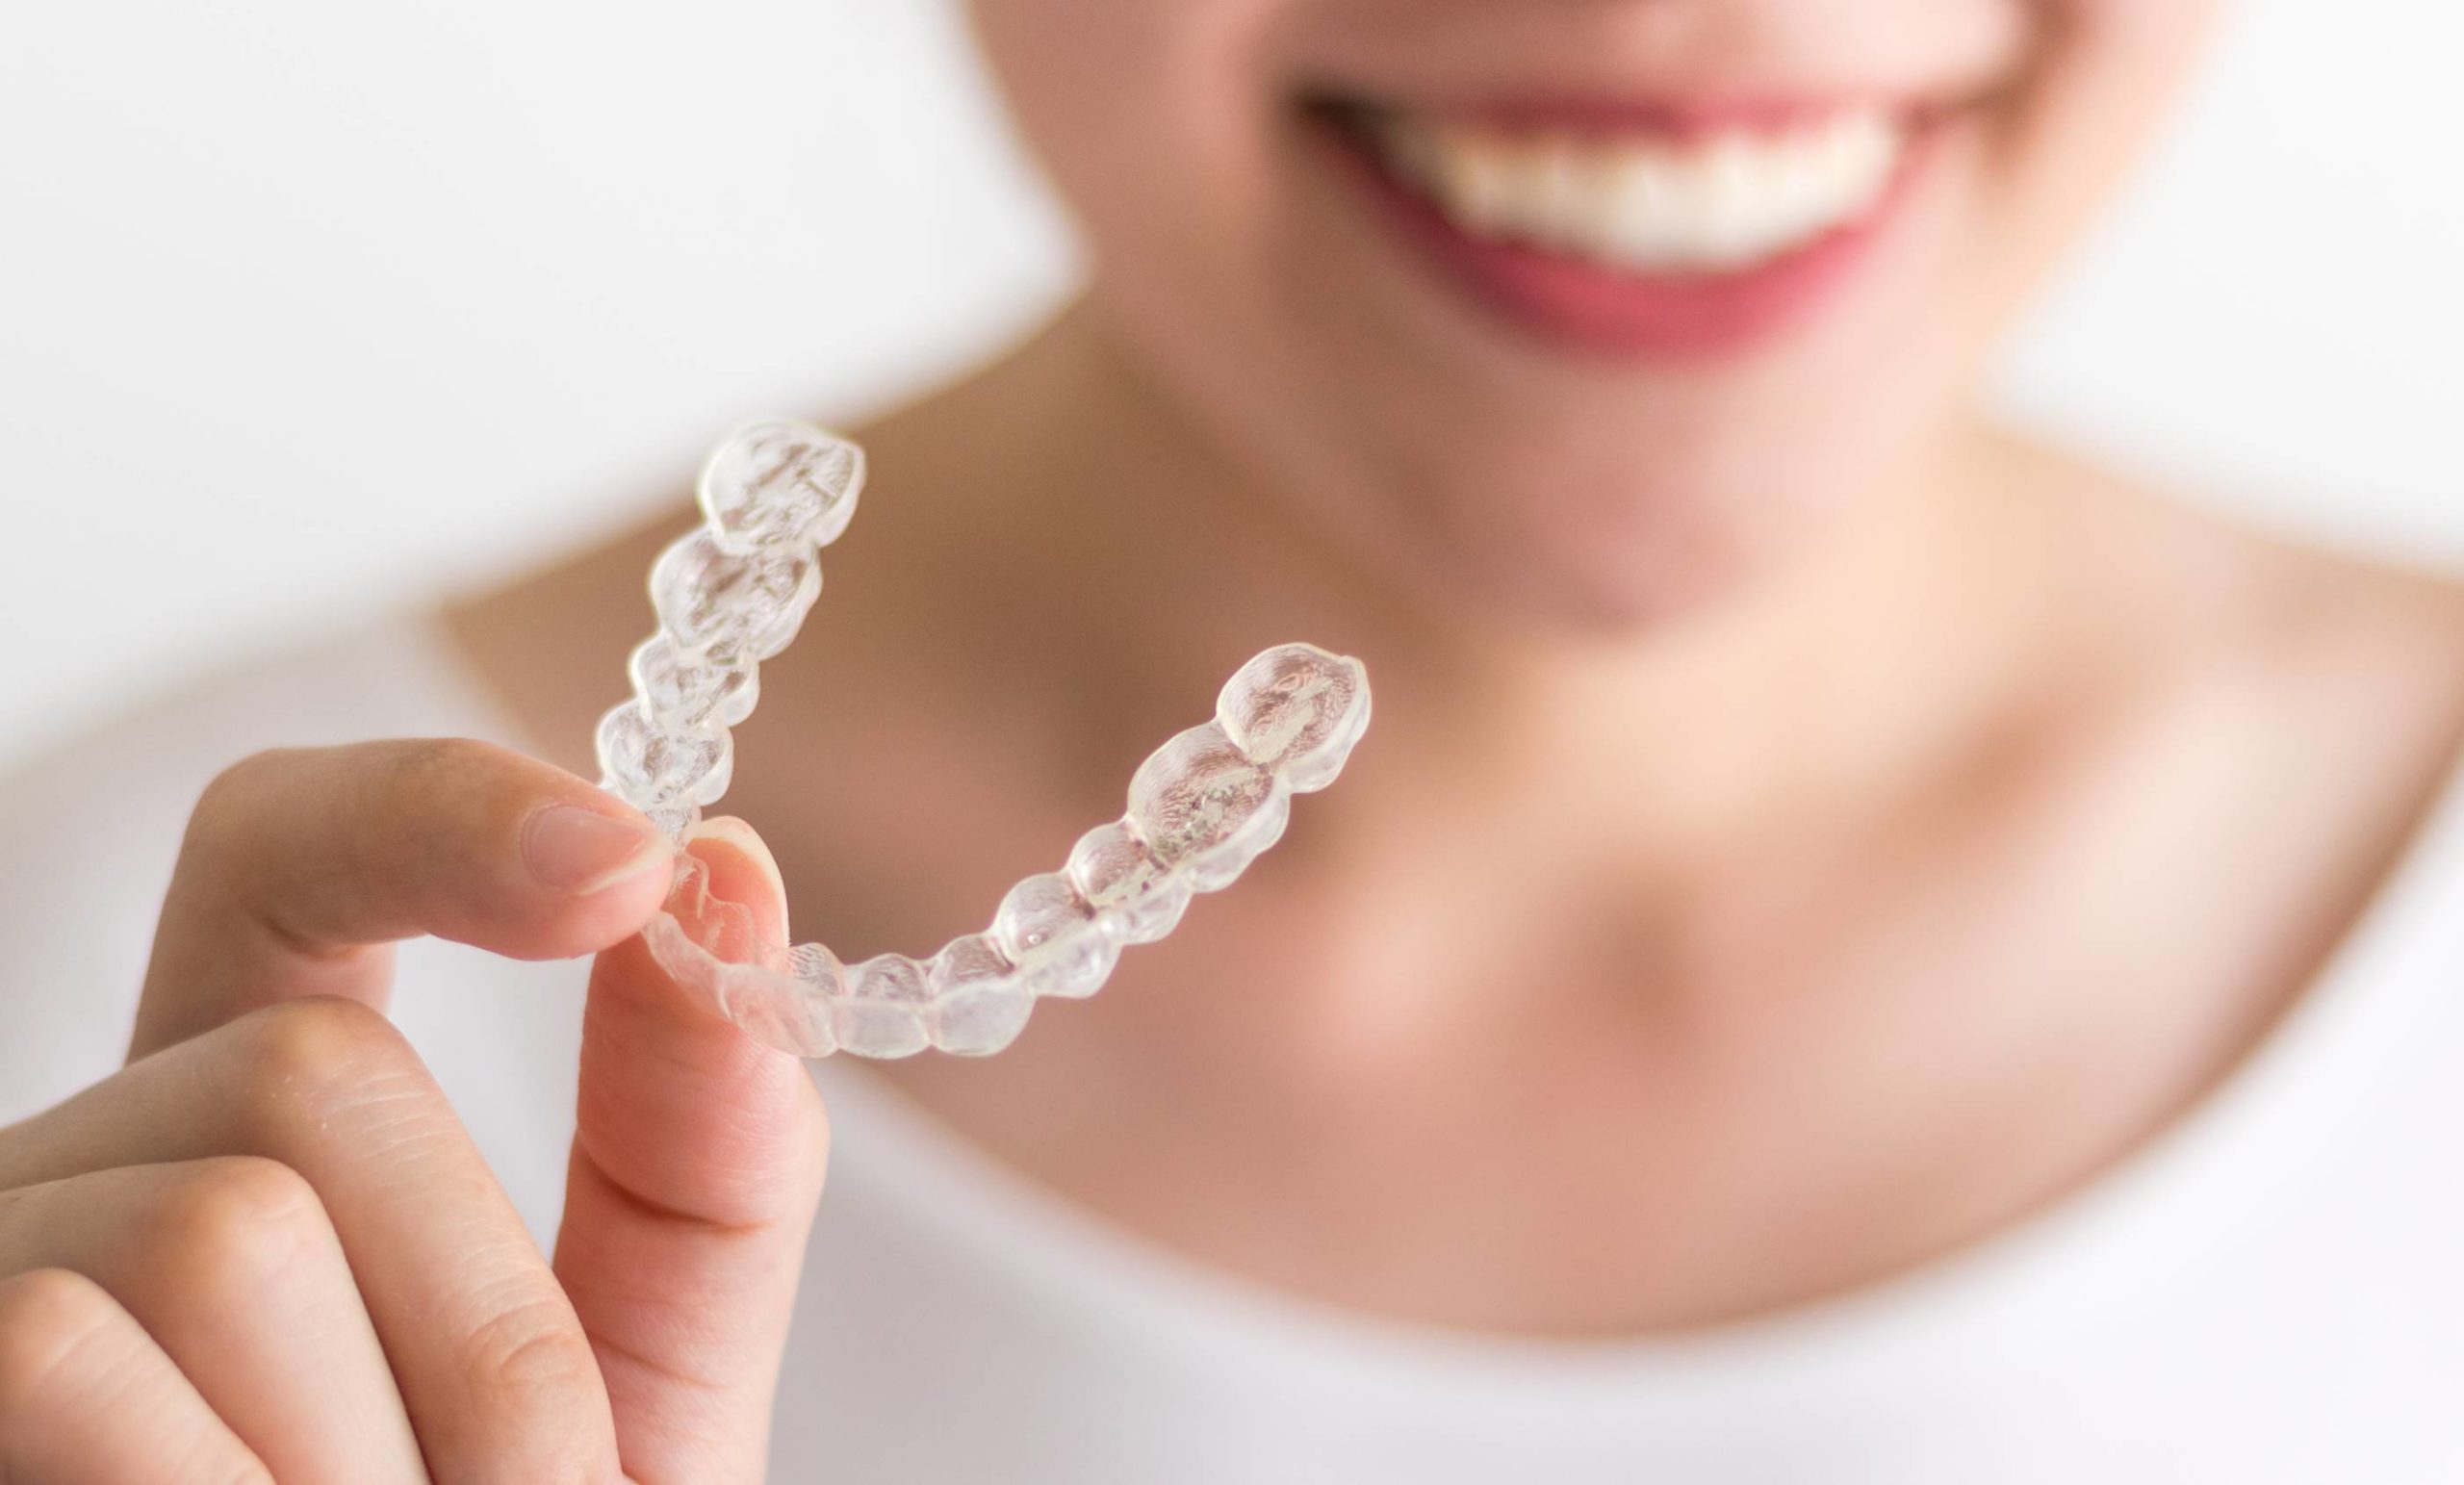 Woman with perfect teeth smiles, holding an Invisalign tray. The tray is in focus, woman's face out of focus in background.